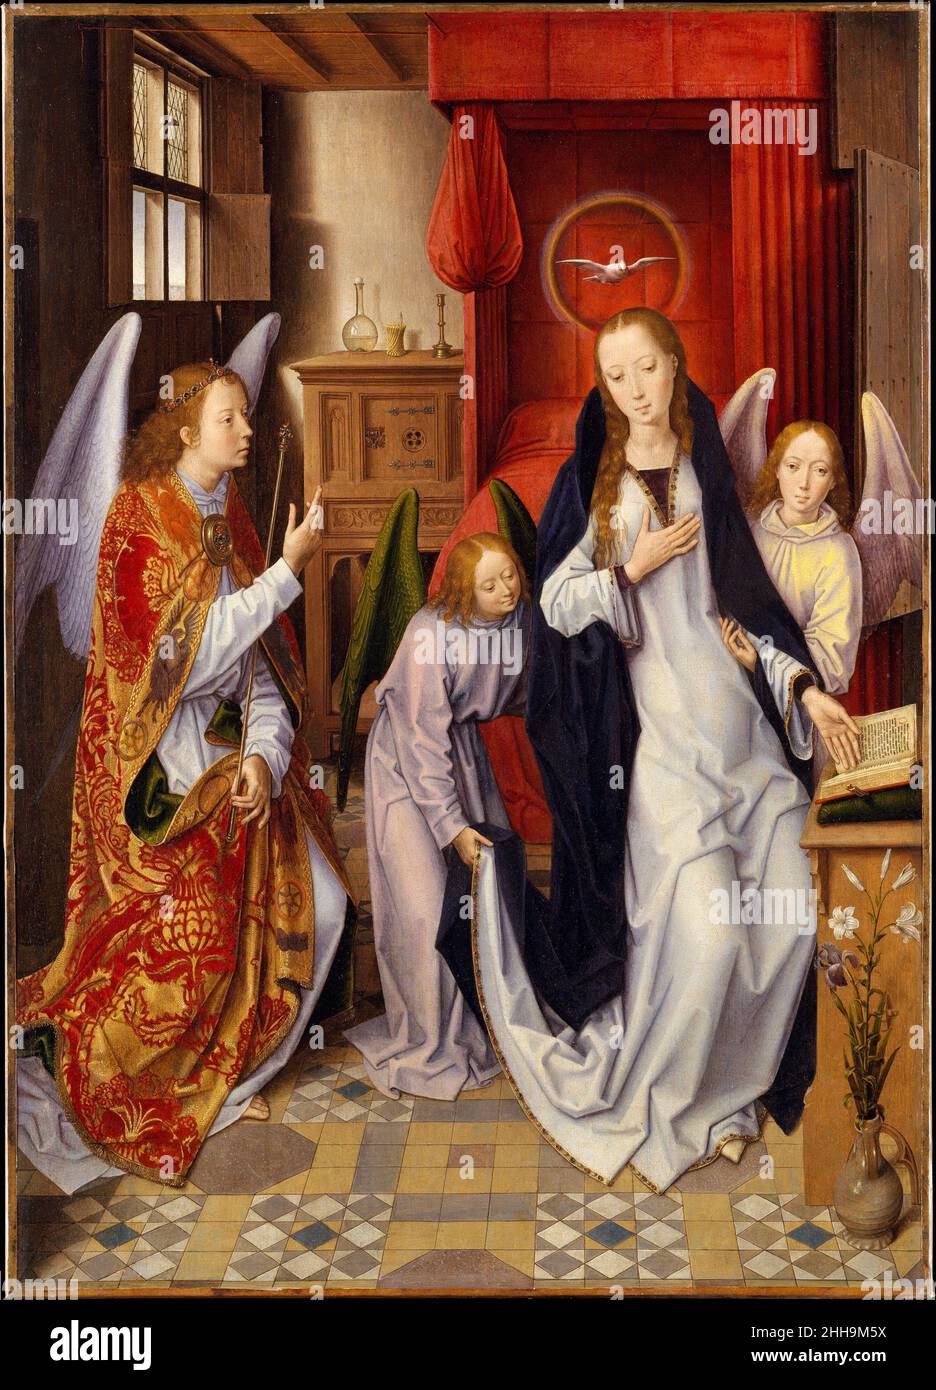 The Annunciation 1480–89 Hans Memling Netherlandish Memling modeled this Annunciation on the left wing of Rogier van der Weyden’s Saint Columba Altarpiece (now in Munich), but his innovative rendition portrays the Virgin swooning and supported by two angels, rather than kneeling. Like other fifteenth-century Flemish painters working in the wake of Jan van Eyck, Hans Memling cloaked religious imagery in the pictorial language of everyday life, paying close attention to naturalistic detail. This Annunciation takes place in a comfortably appointed bedchamber, though many of the domestic furnishin Stock Photo